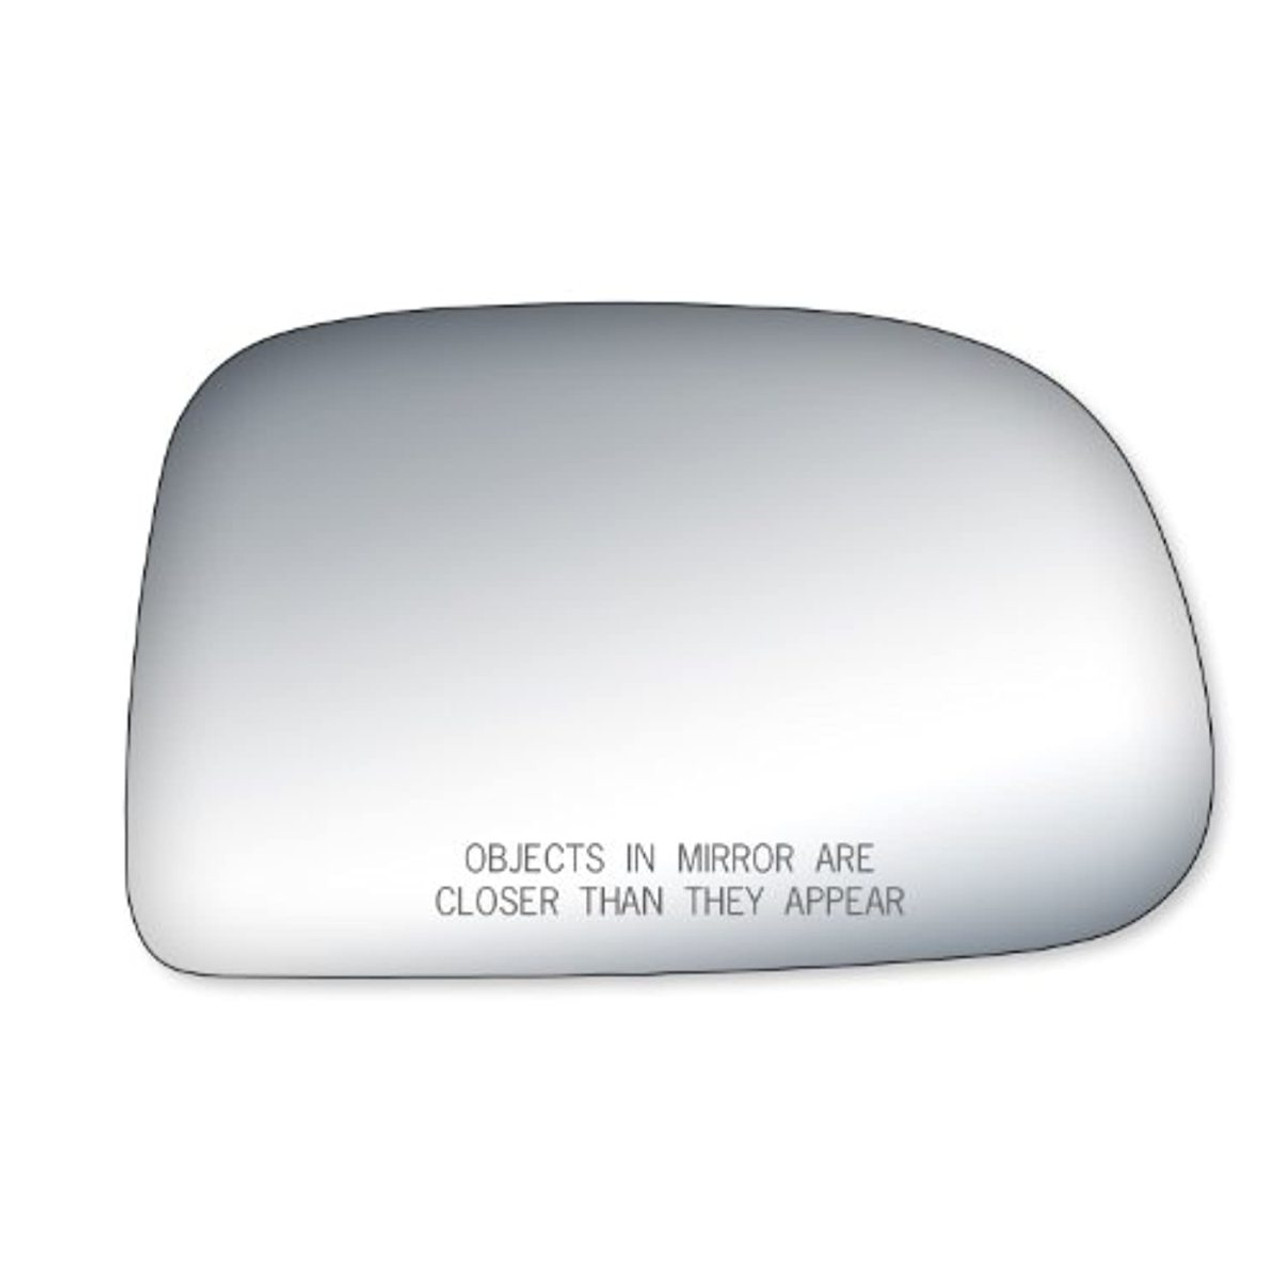 Fit System Passenger Side Mirror Glass, Toyota Tacoma